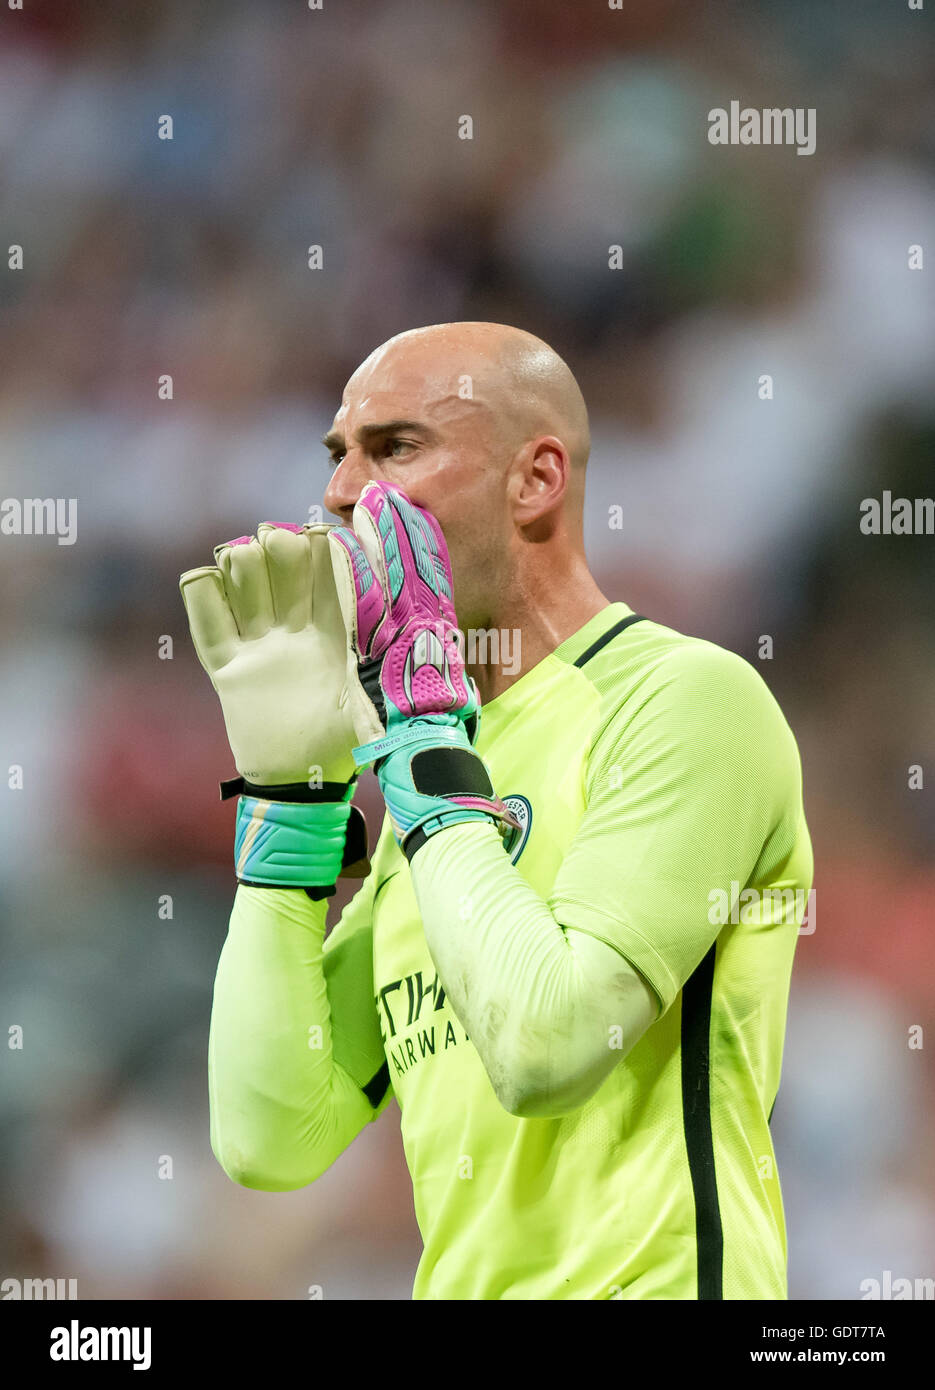 Munich, Germany. 20th July, 2016. Manchester's goalkeeper Willy Caballero seen during an international soccer friendly match between FC Bayern Munich and Manchester City at the Allianz Arena in Munich, Germany, 20 July 2016. Photo: THOMAS EISENHUTH/dpa - NO WIRE SERVICE -/dpa/Alamy Live News Stock Photo